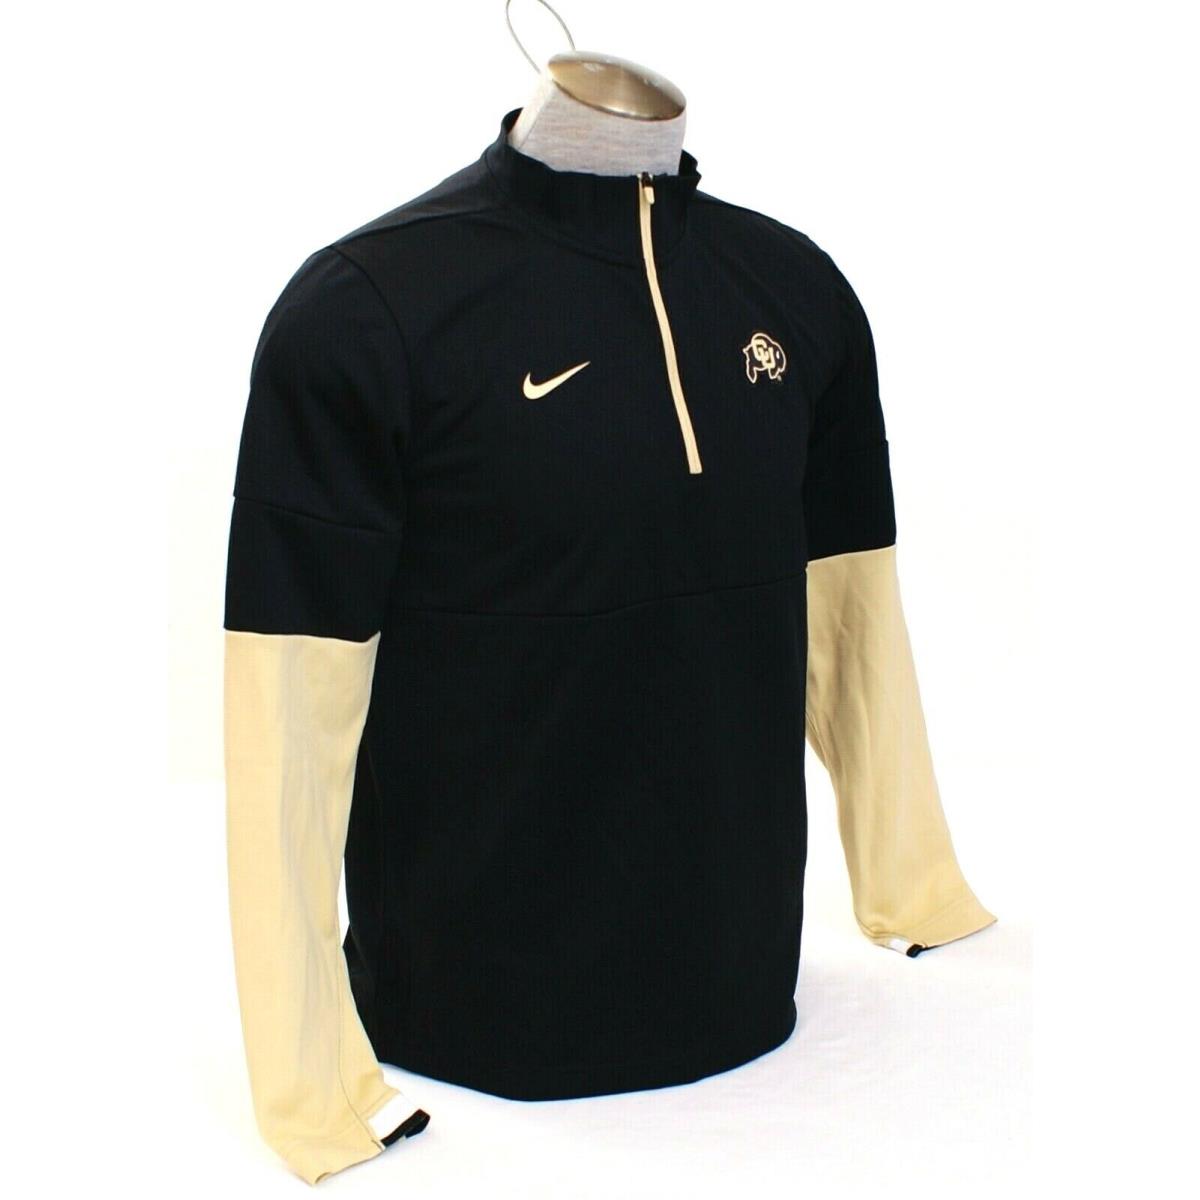 Nike clothing Official Field Apparel - Black & Gold 2